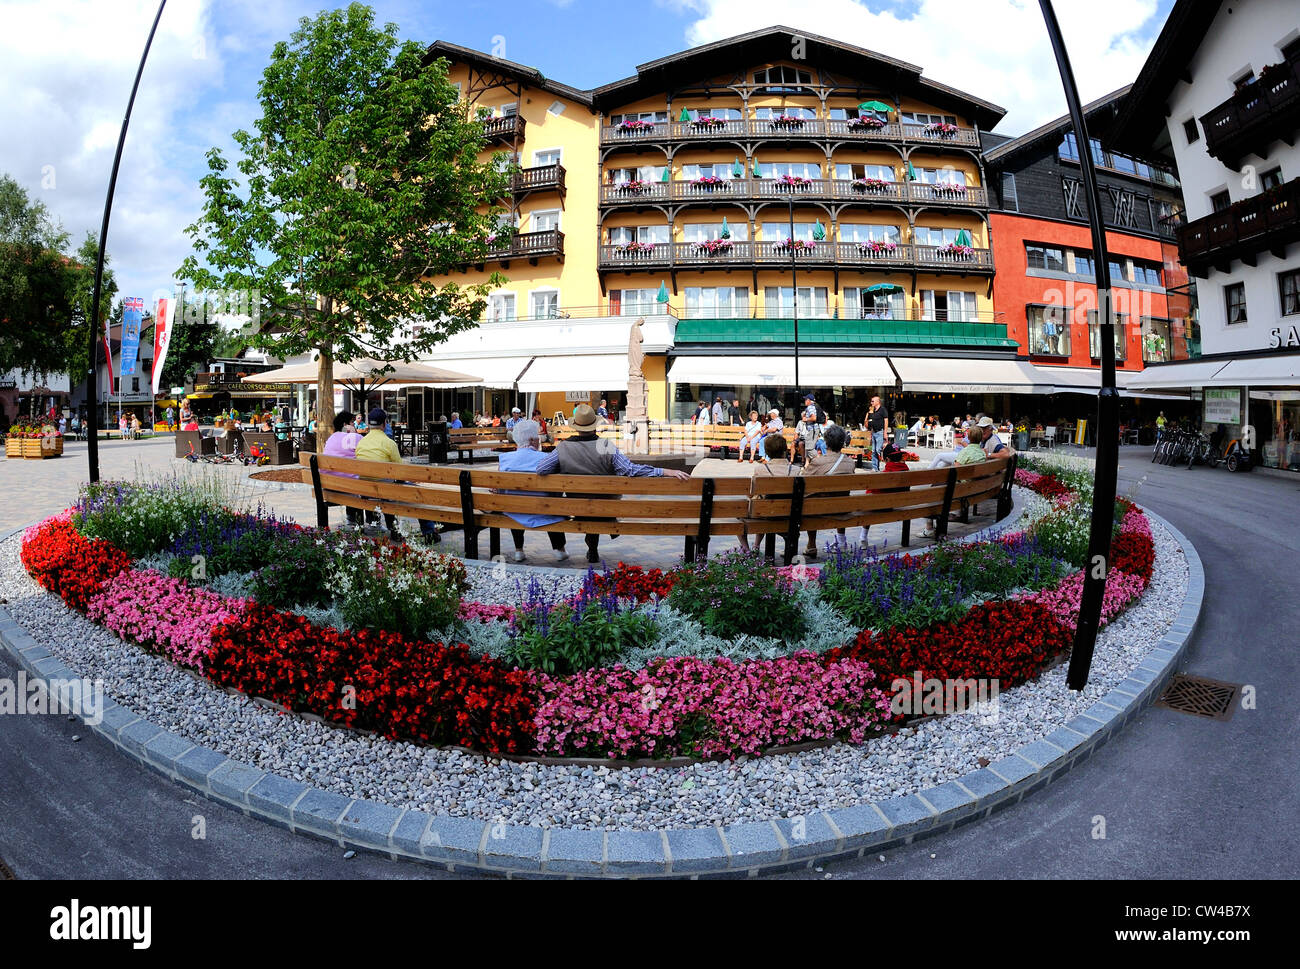 Main public square in Seefeld, Austria, with bedded flowers and seating for people to relax. Stock Photo